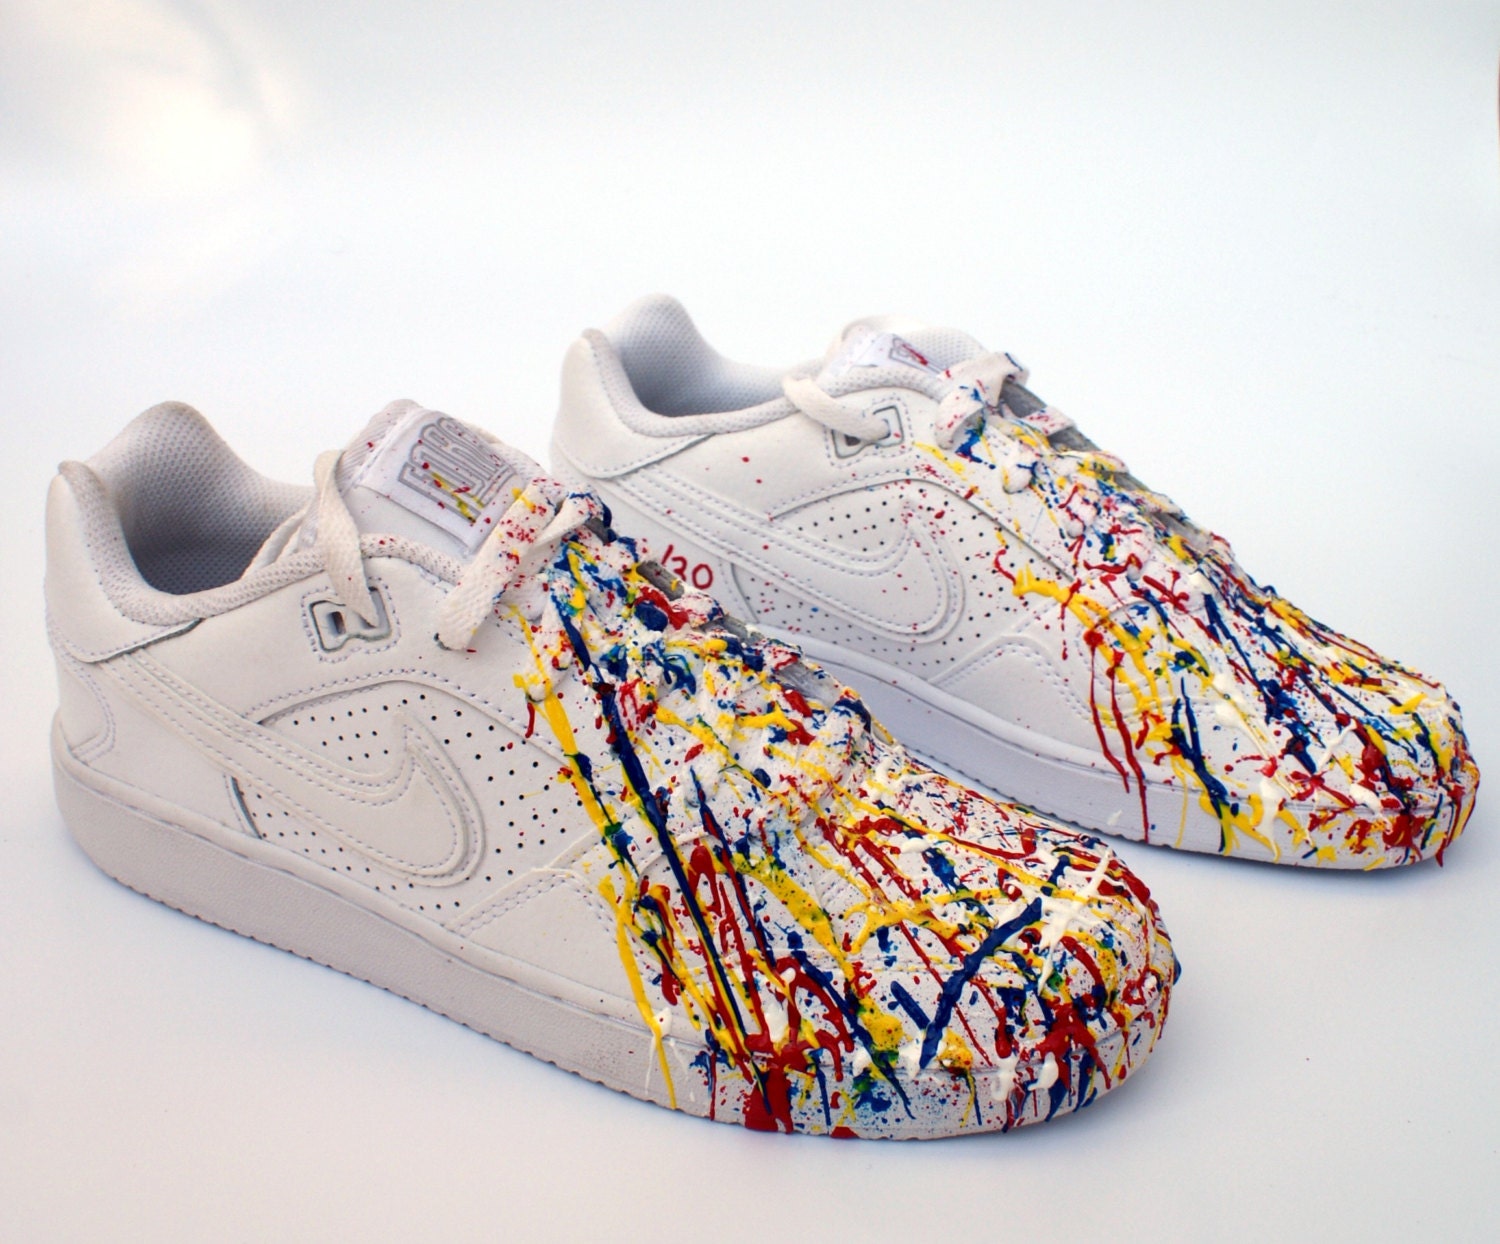 Sneakers Nike Son of force shoes low white splatter painting